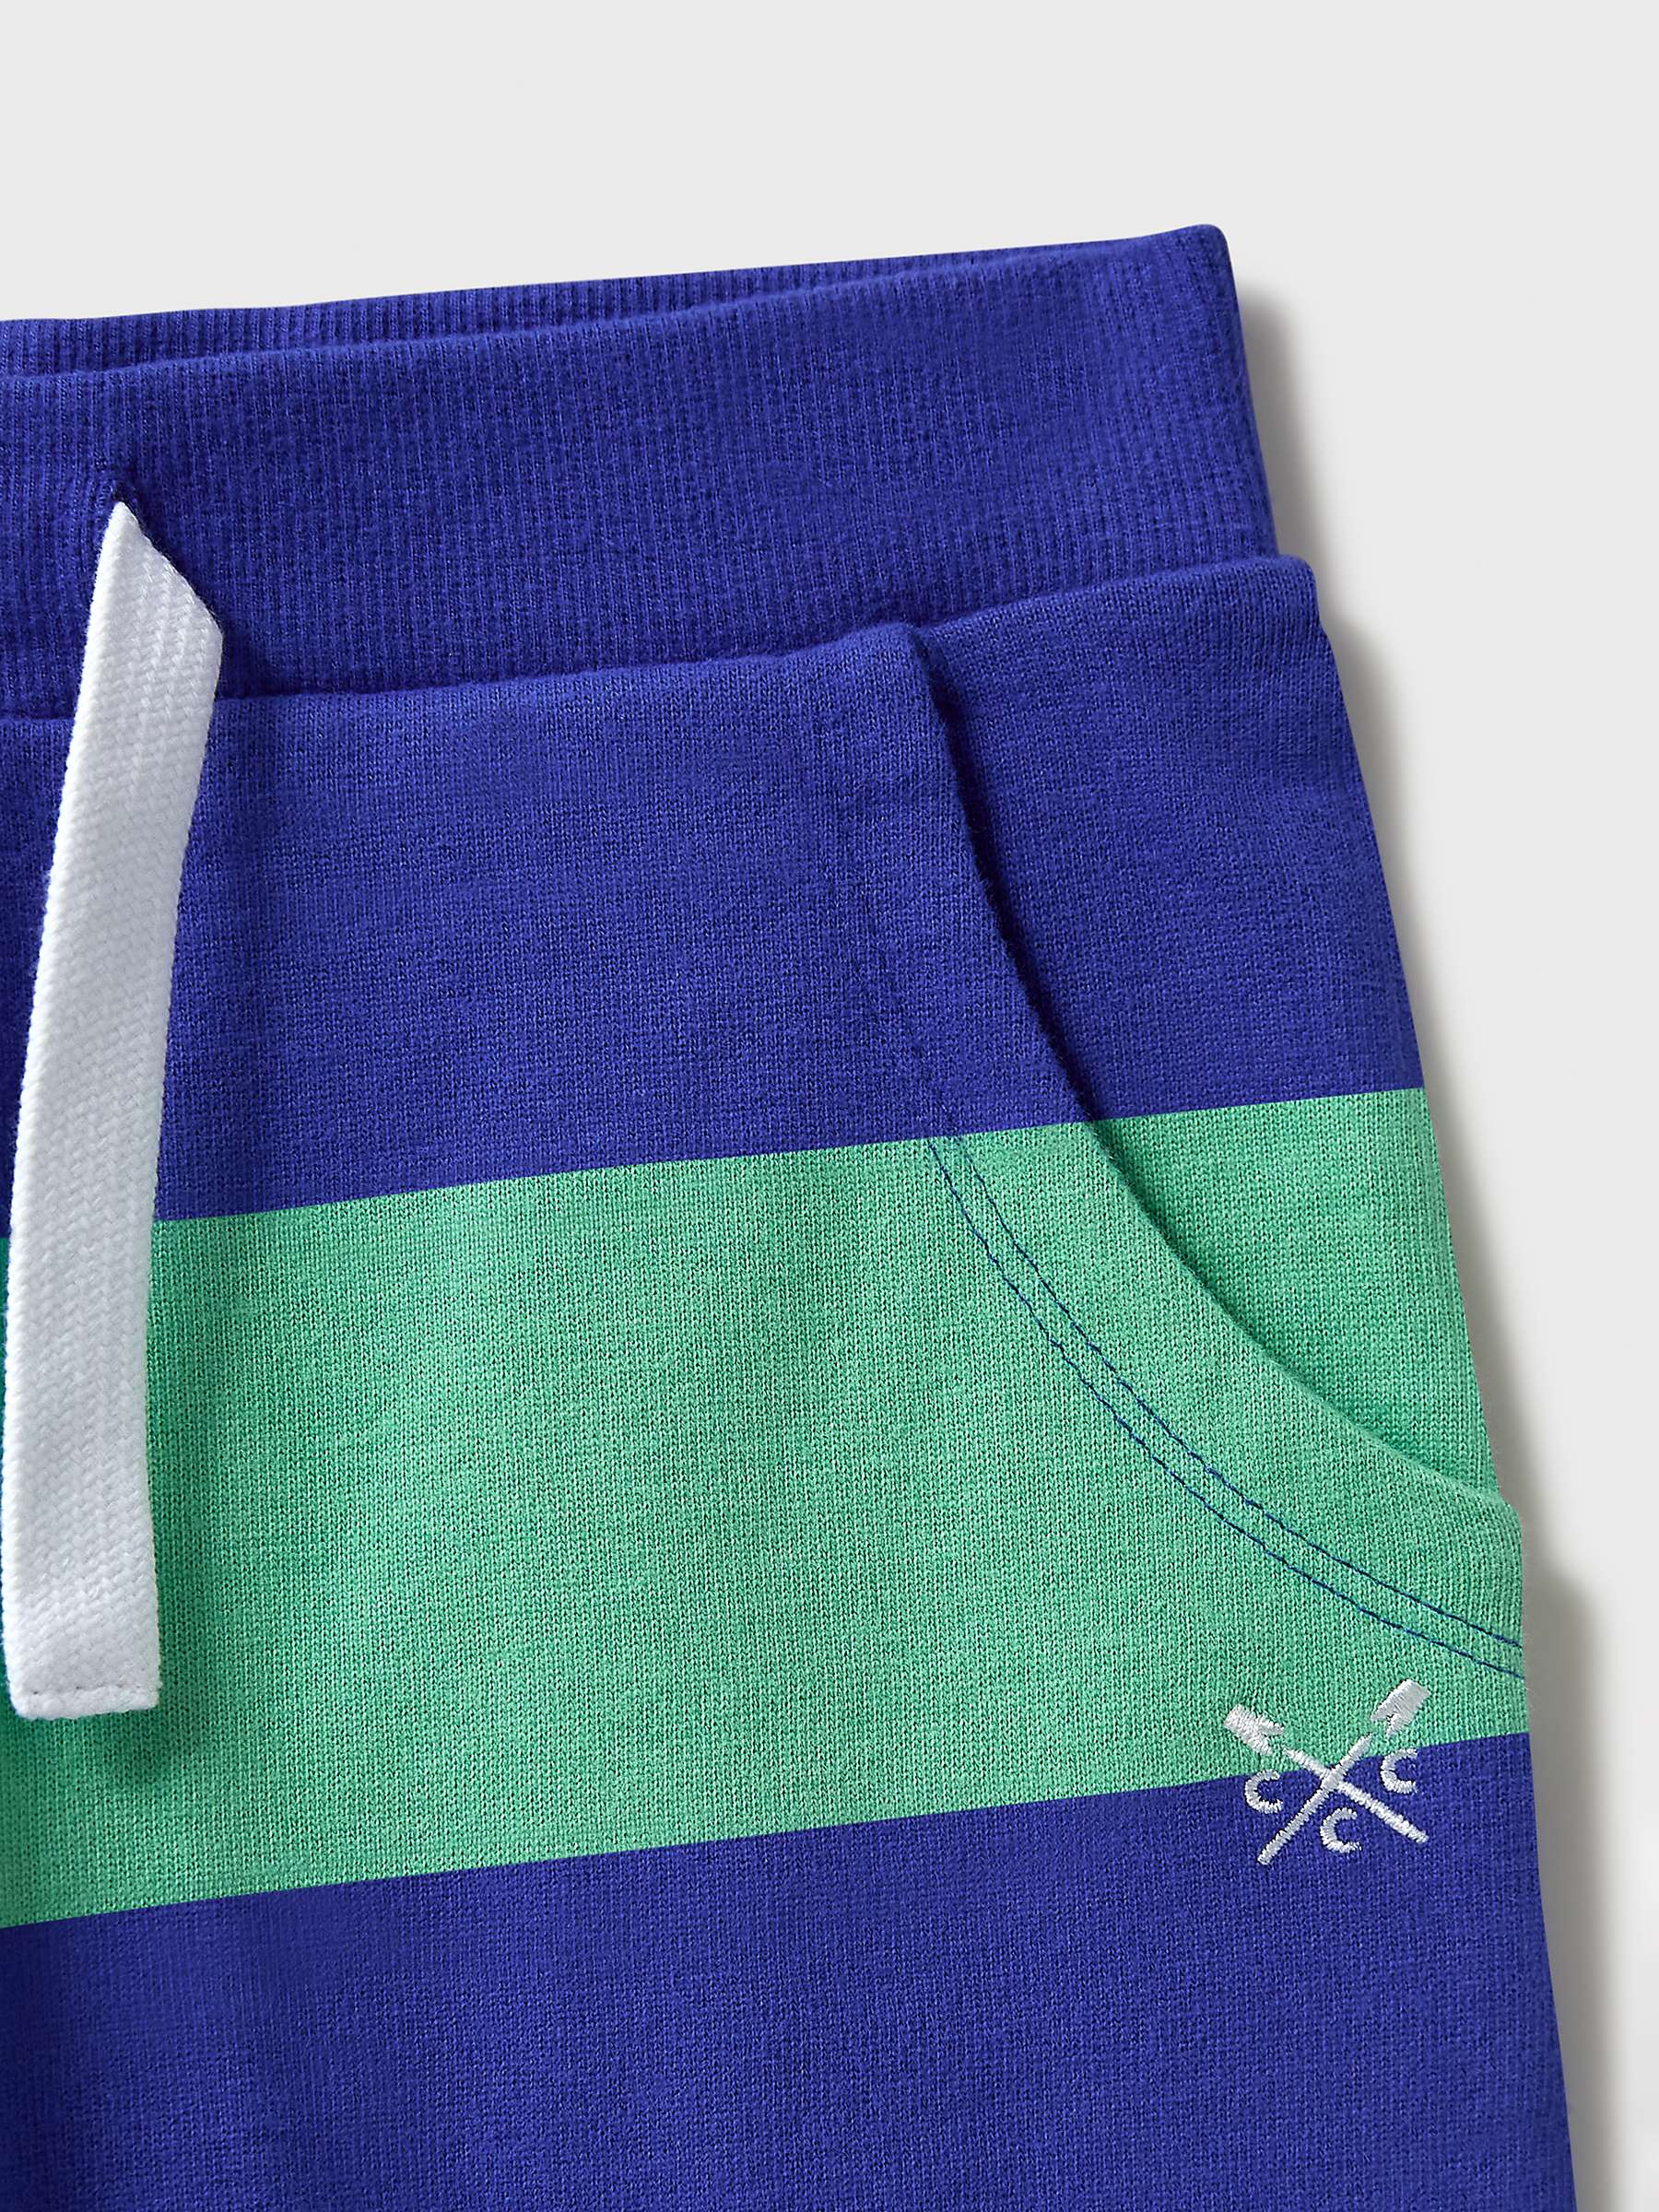 Buy Crew Clothing Kids' Rugby Stripe Jogger Shorts, Navy Blue/Green Online at johnlewis.com